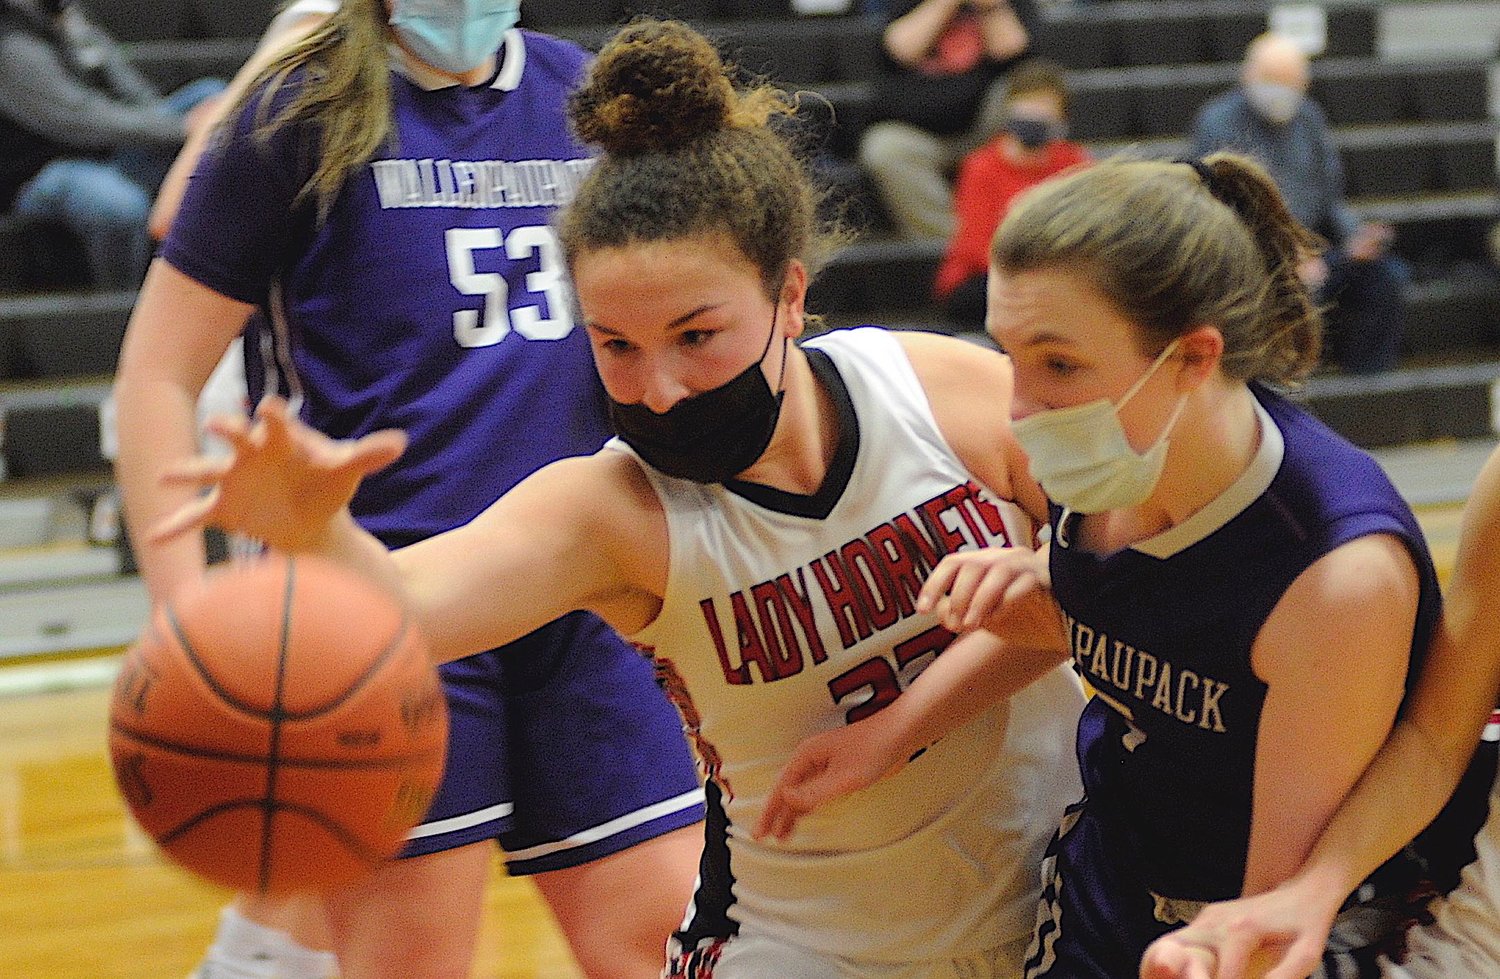 Long reach. Honesdale’s Chloe Lyle posted 8 points.